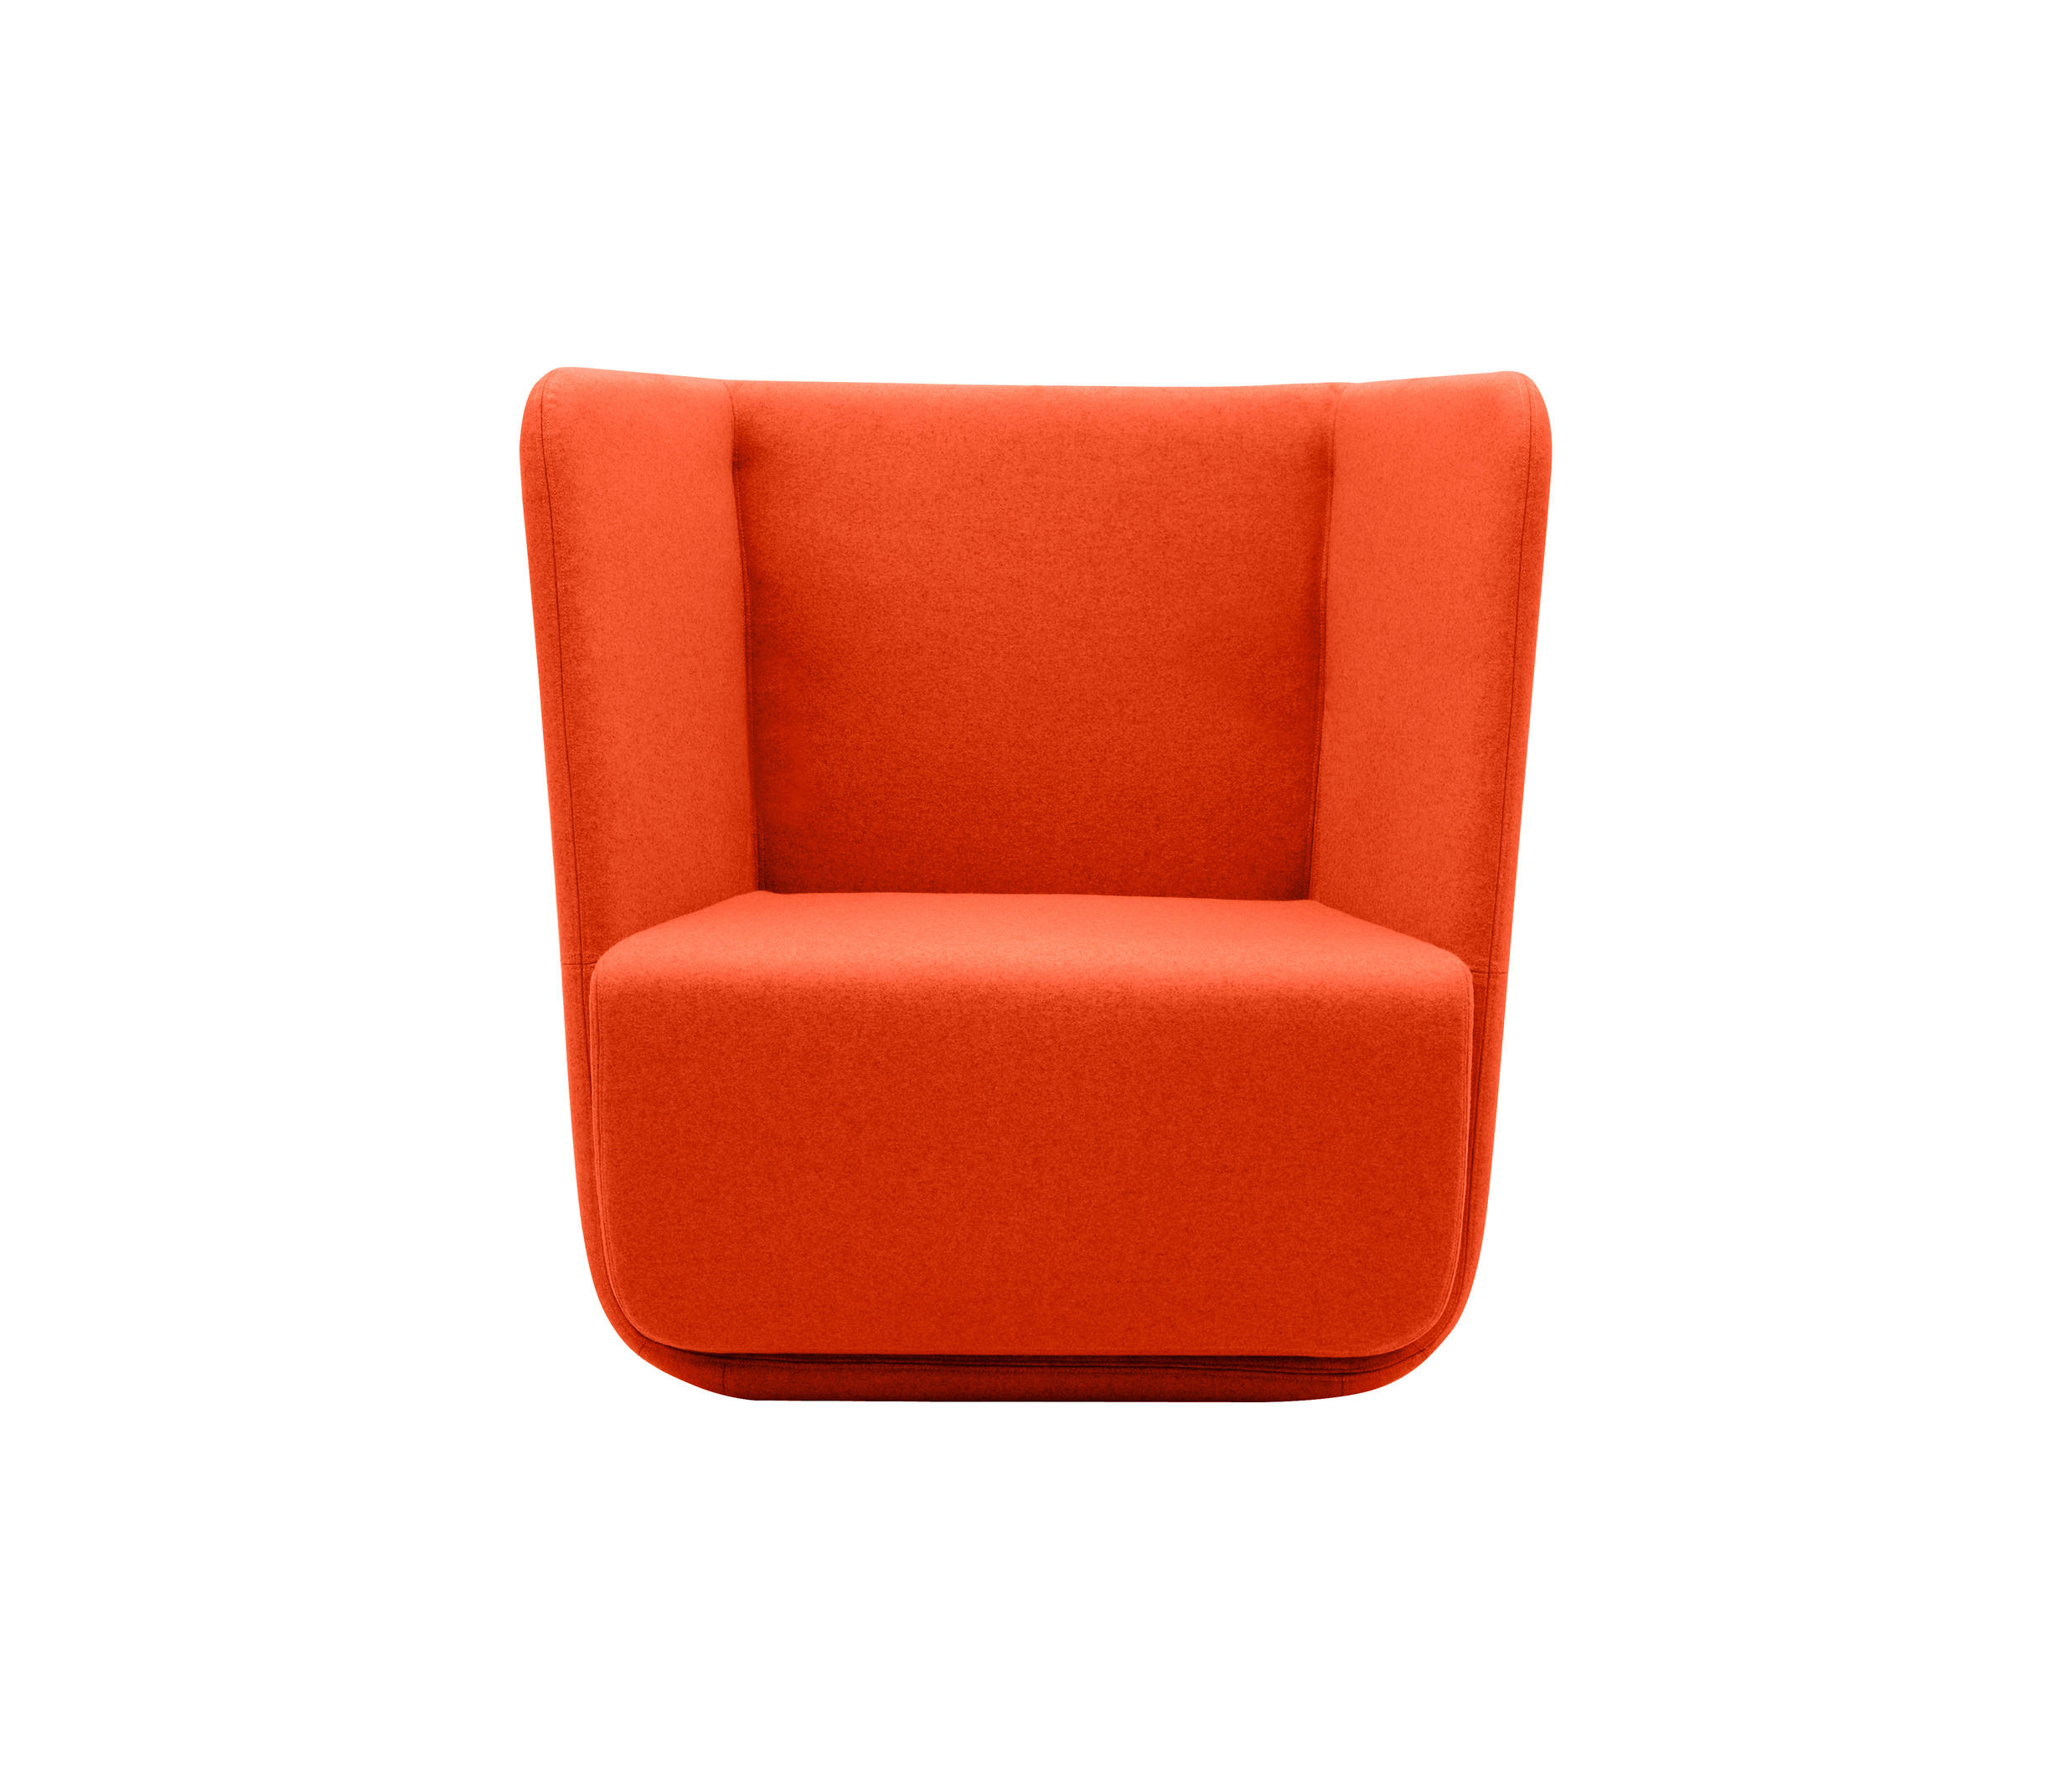 BASKET CHAIR LOW - Armchairs from Softline A/S | Architonic